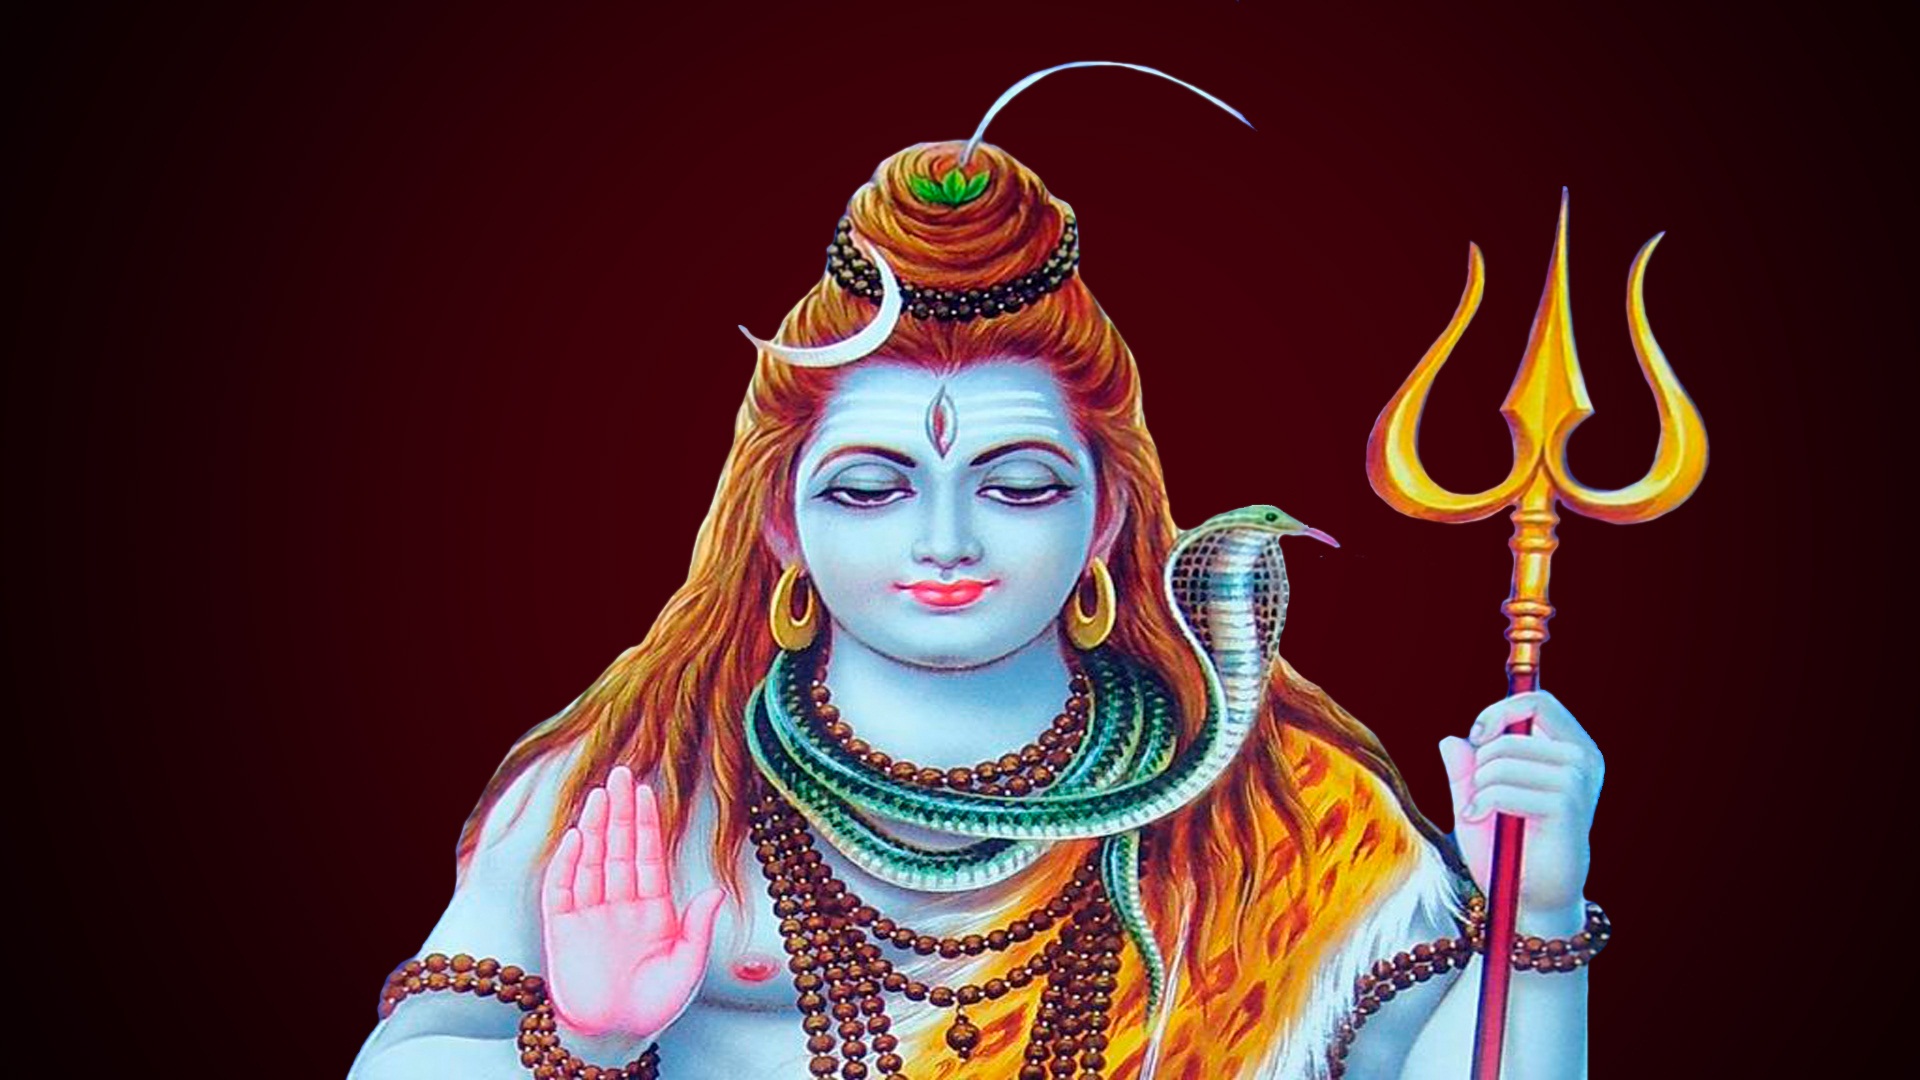 4K wallpaper: Mood Lord Shiva Angry Images Hd 1080p Download